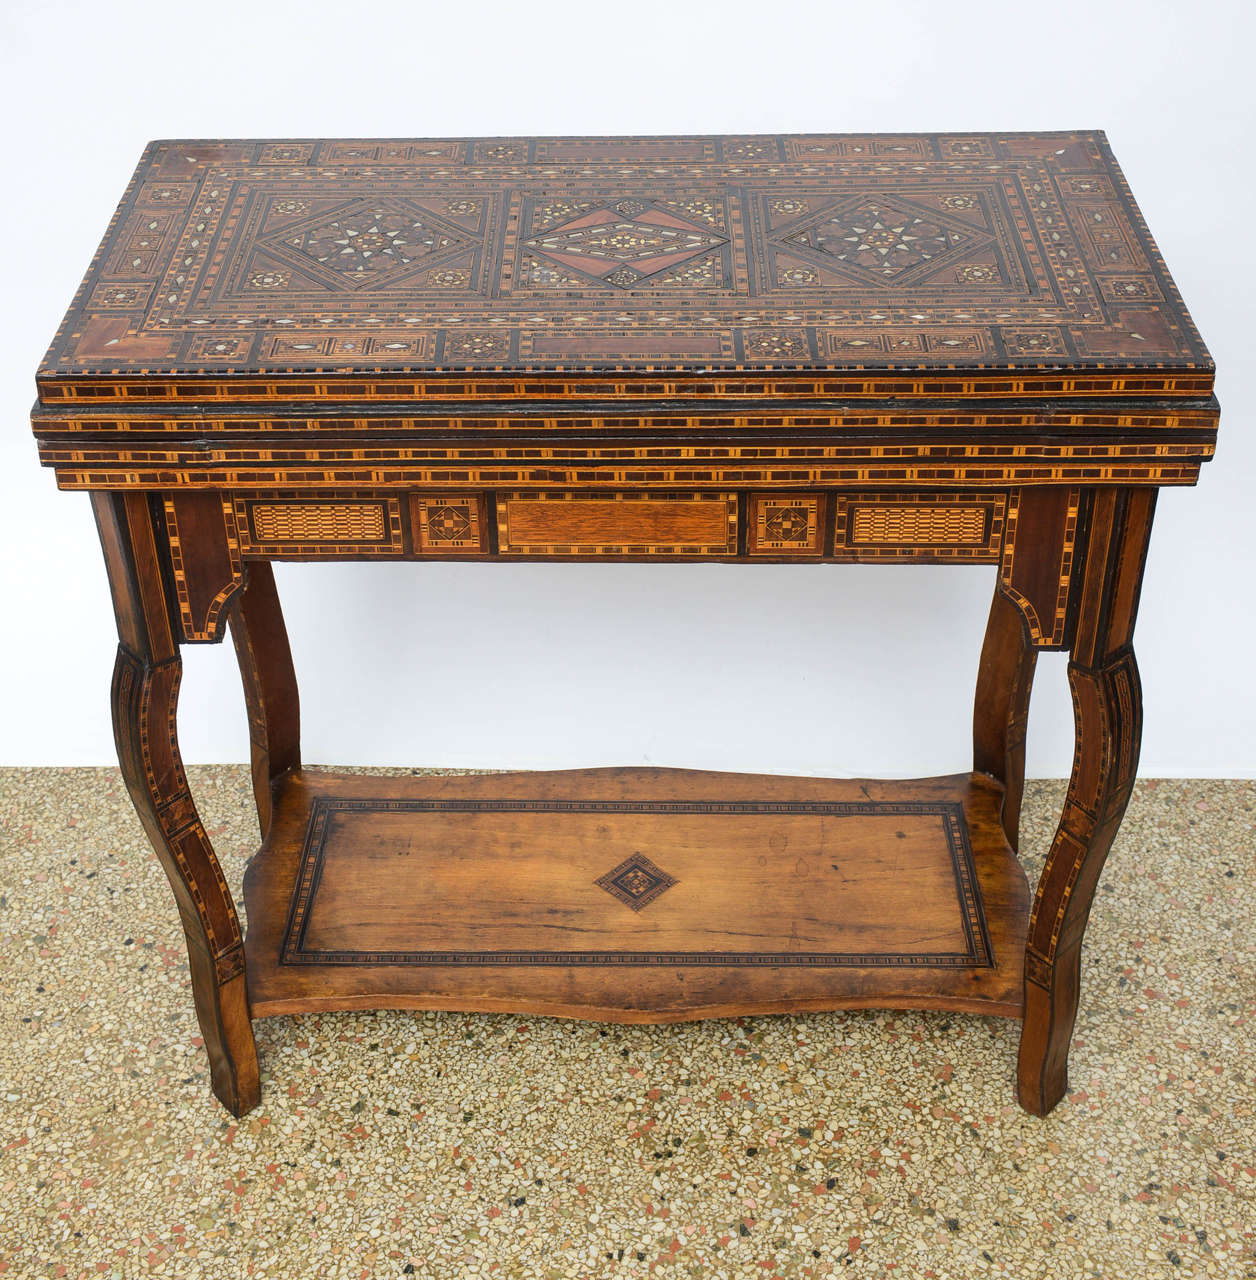 Moroccan multi-purpose games table/ console with shelf.  Table is narrow enough to be used as a console/ sofa table but when opened, it is inlaid for checkers, chess, backgammon & has a green felt top for playing cards or other games.  All the inlay